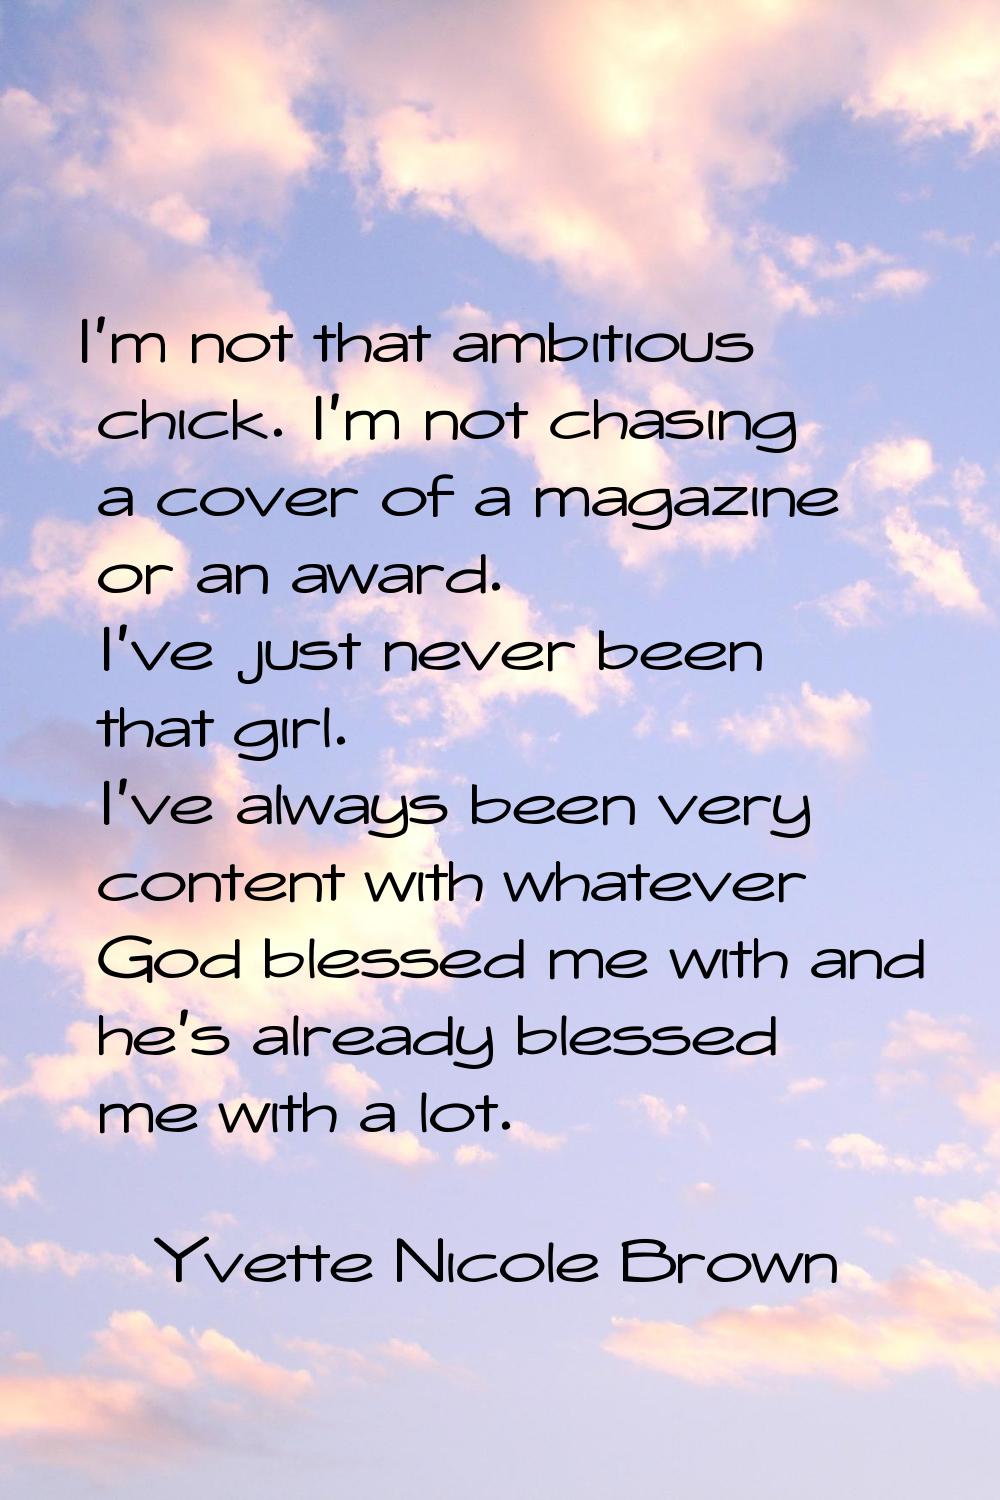 I'm not that ambitious chick. I'm not chasing a cover of a magazine or an award. I've just never be